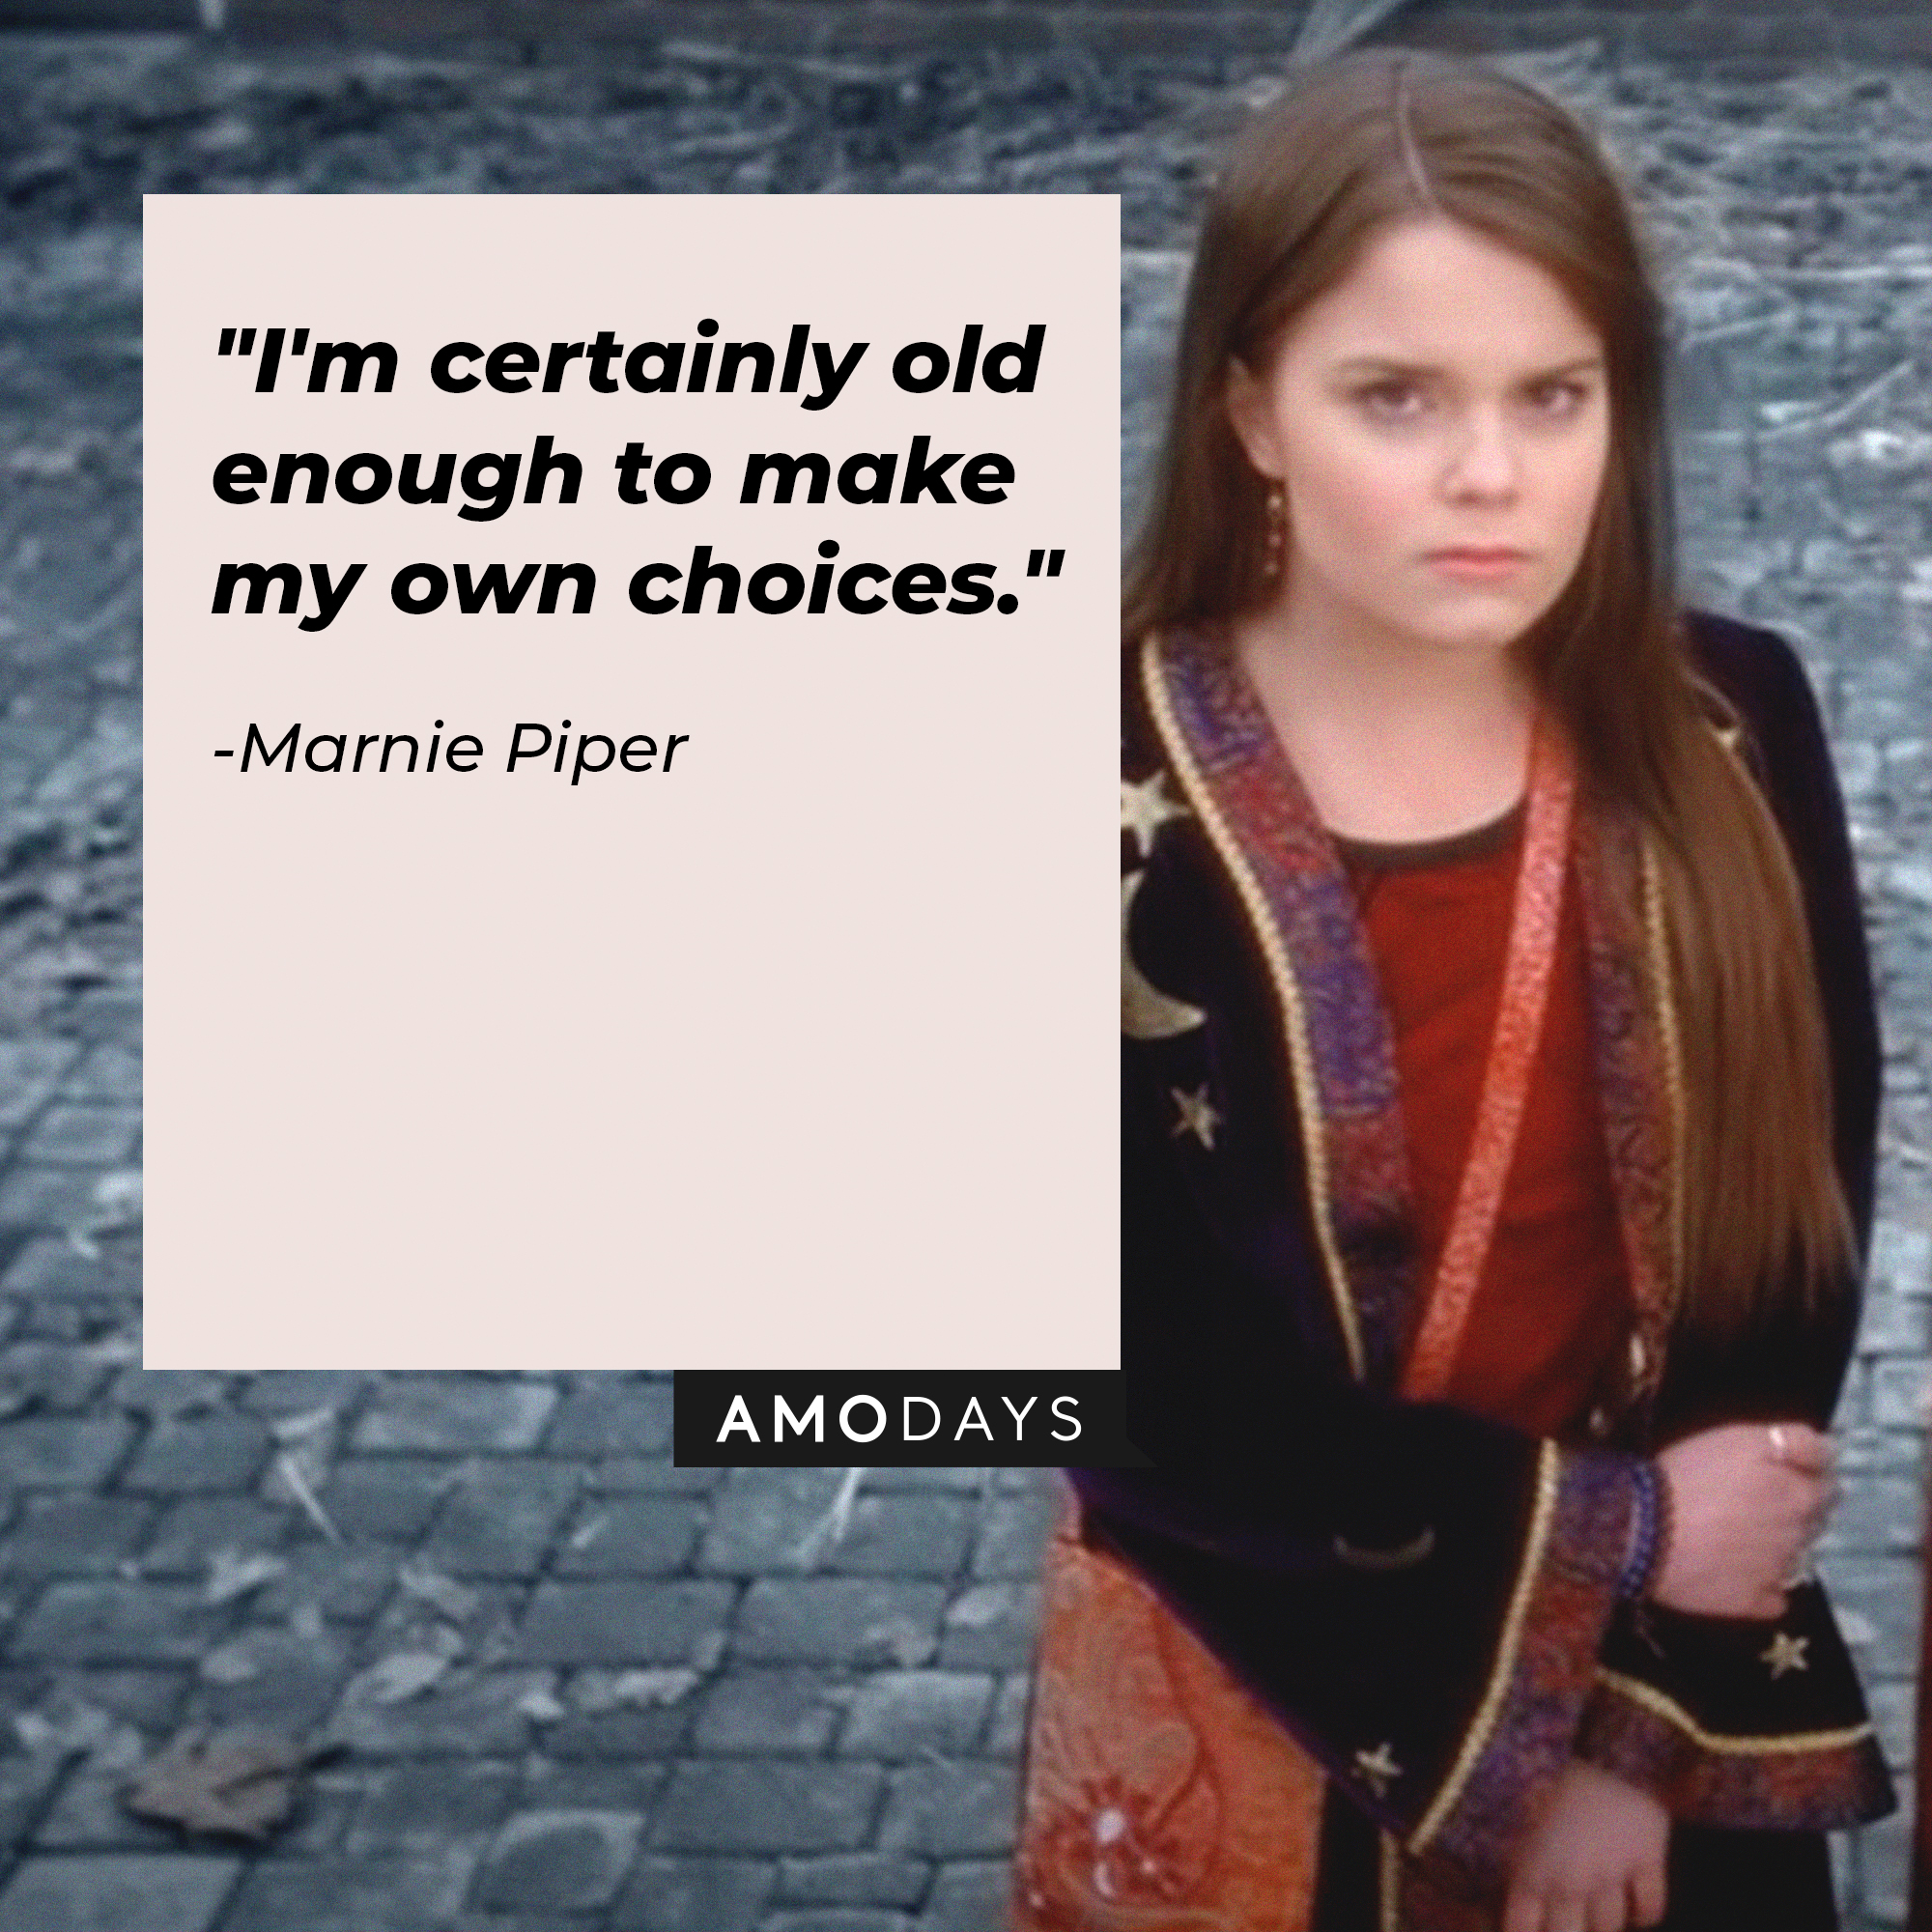 Marnie Piper's quote: "I'm certainly old enough to make my own choices." | Source: Youtube.com/disneychannel